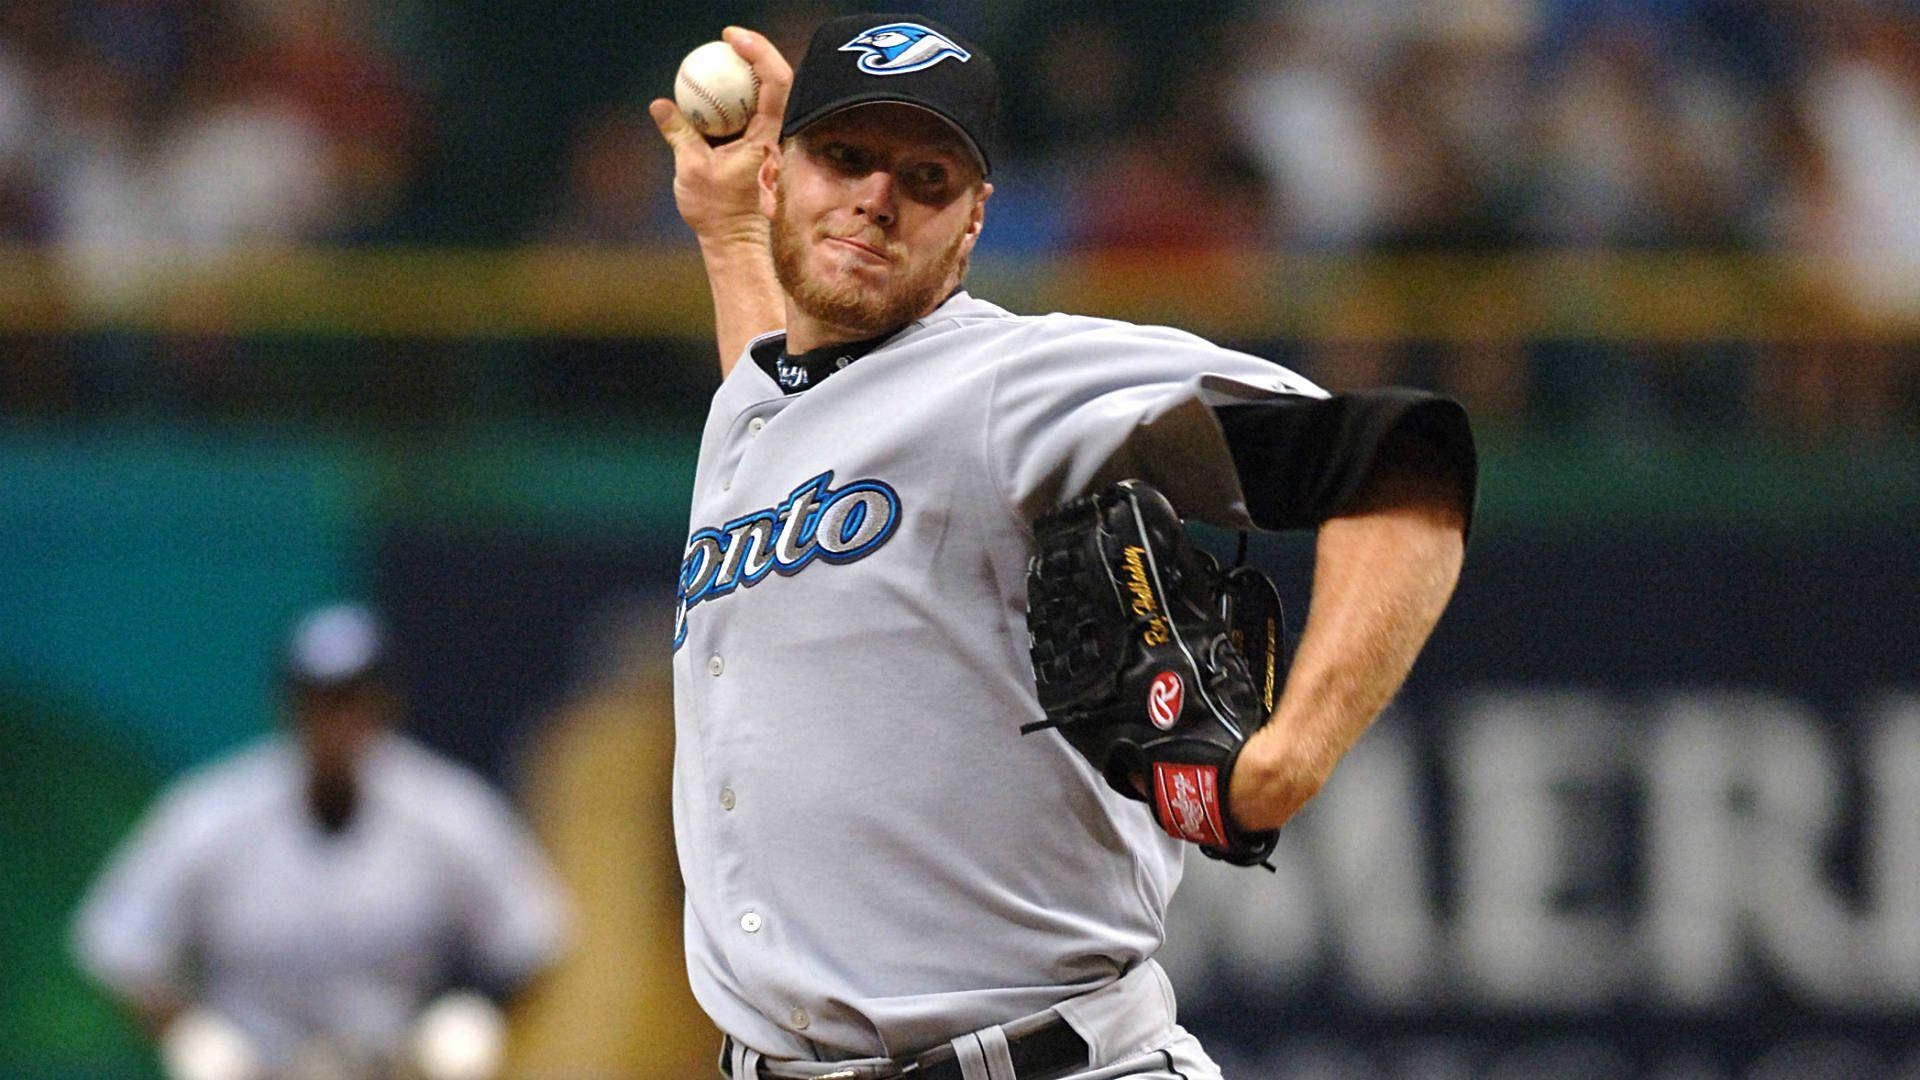 Roy Halladay Throwing Baseball While Holding Glove Background